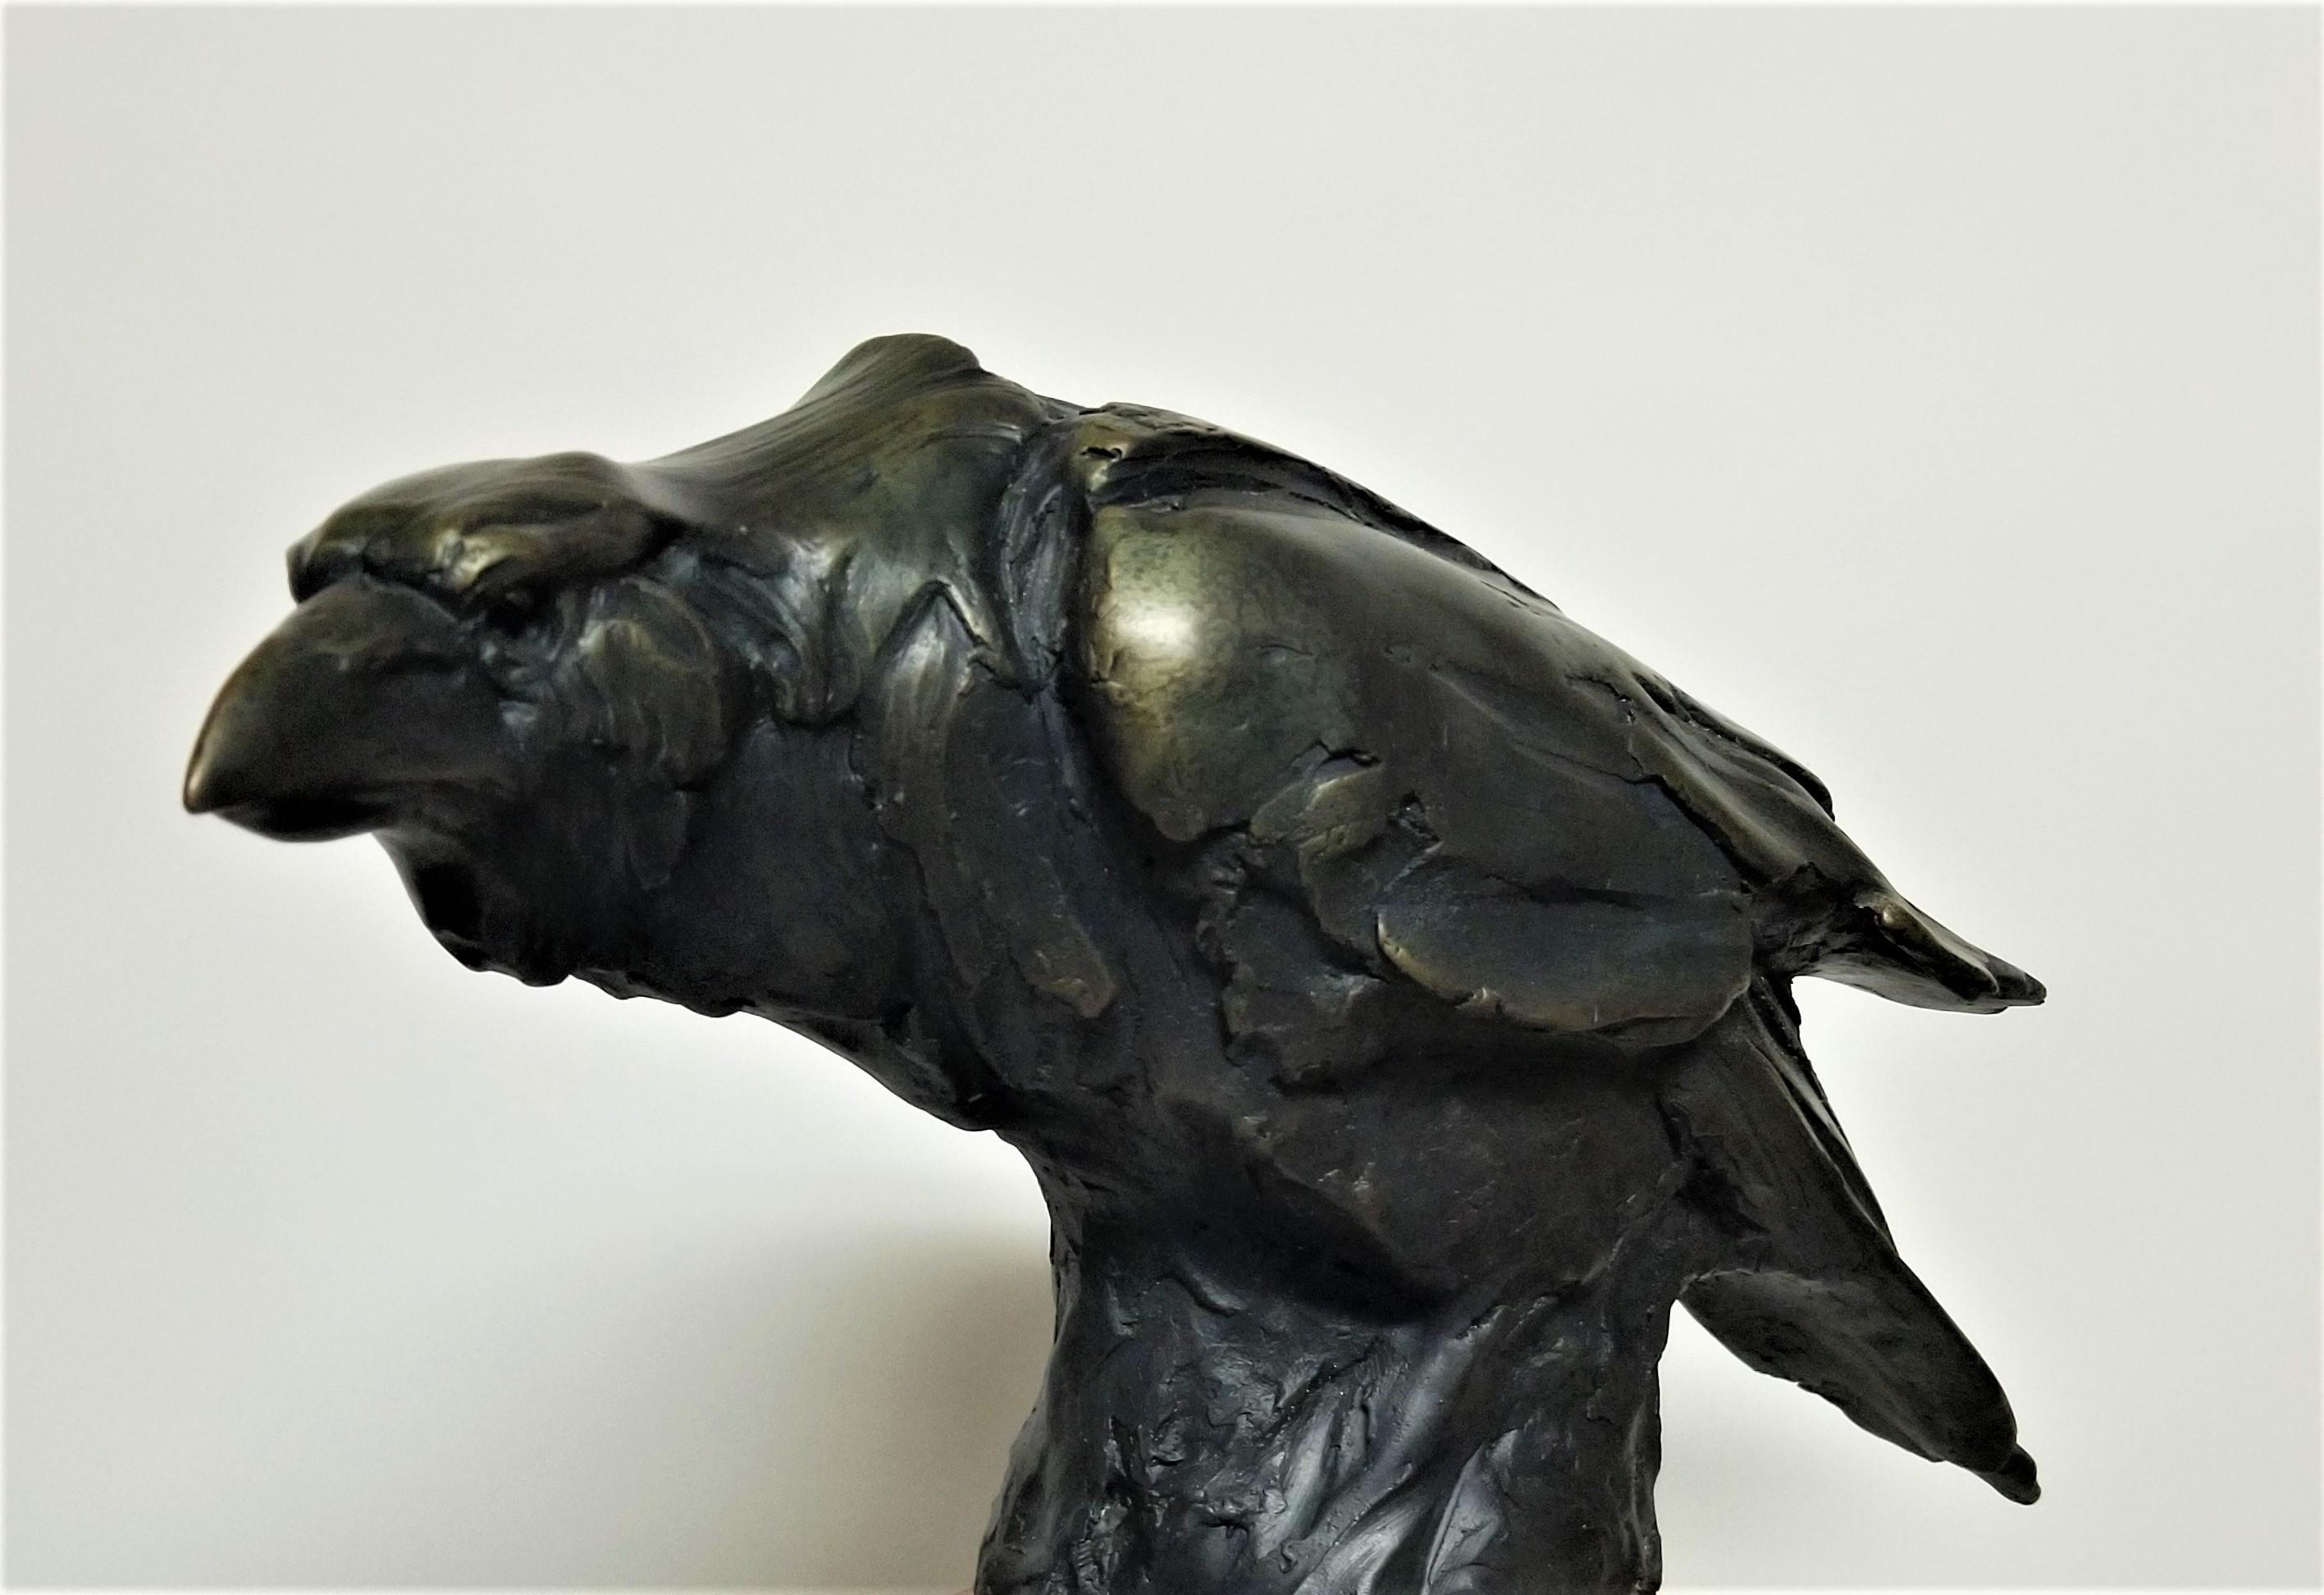 The Messenger by Craig Campbell
Expressionistic Raven Sculpture
18 x 5 x 10